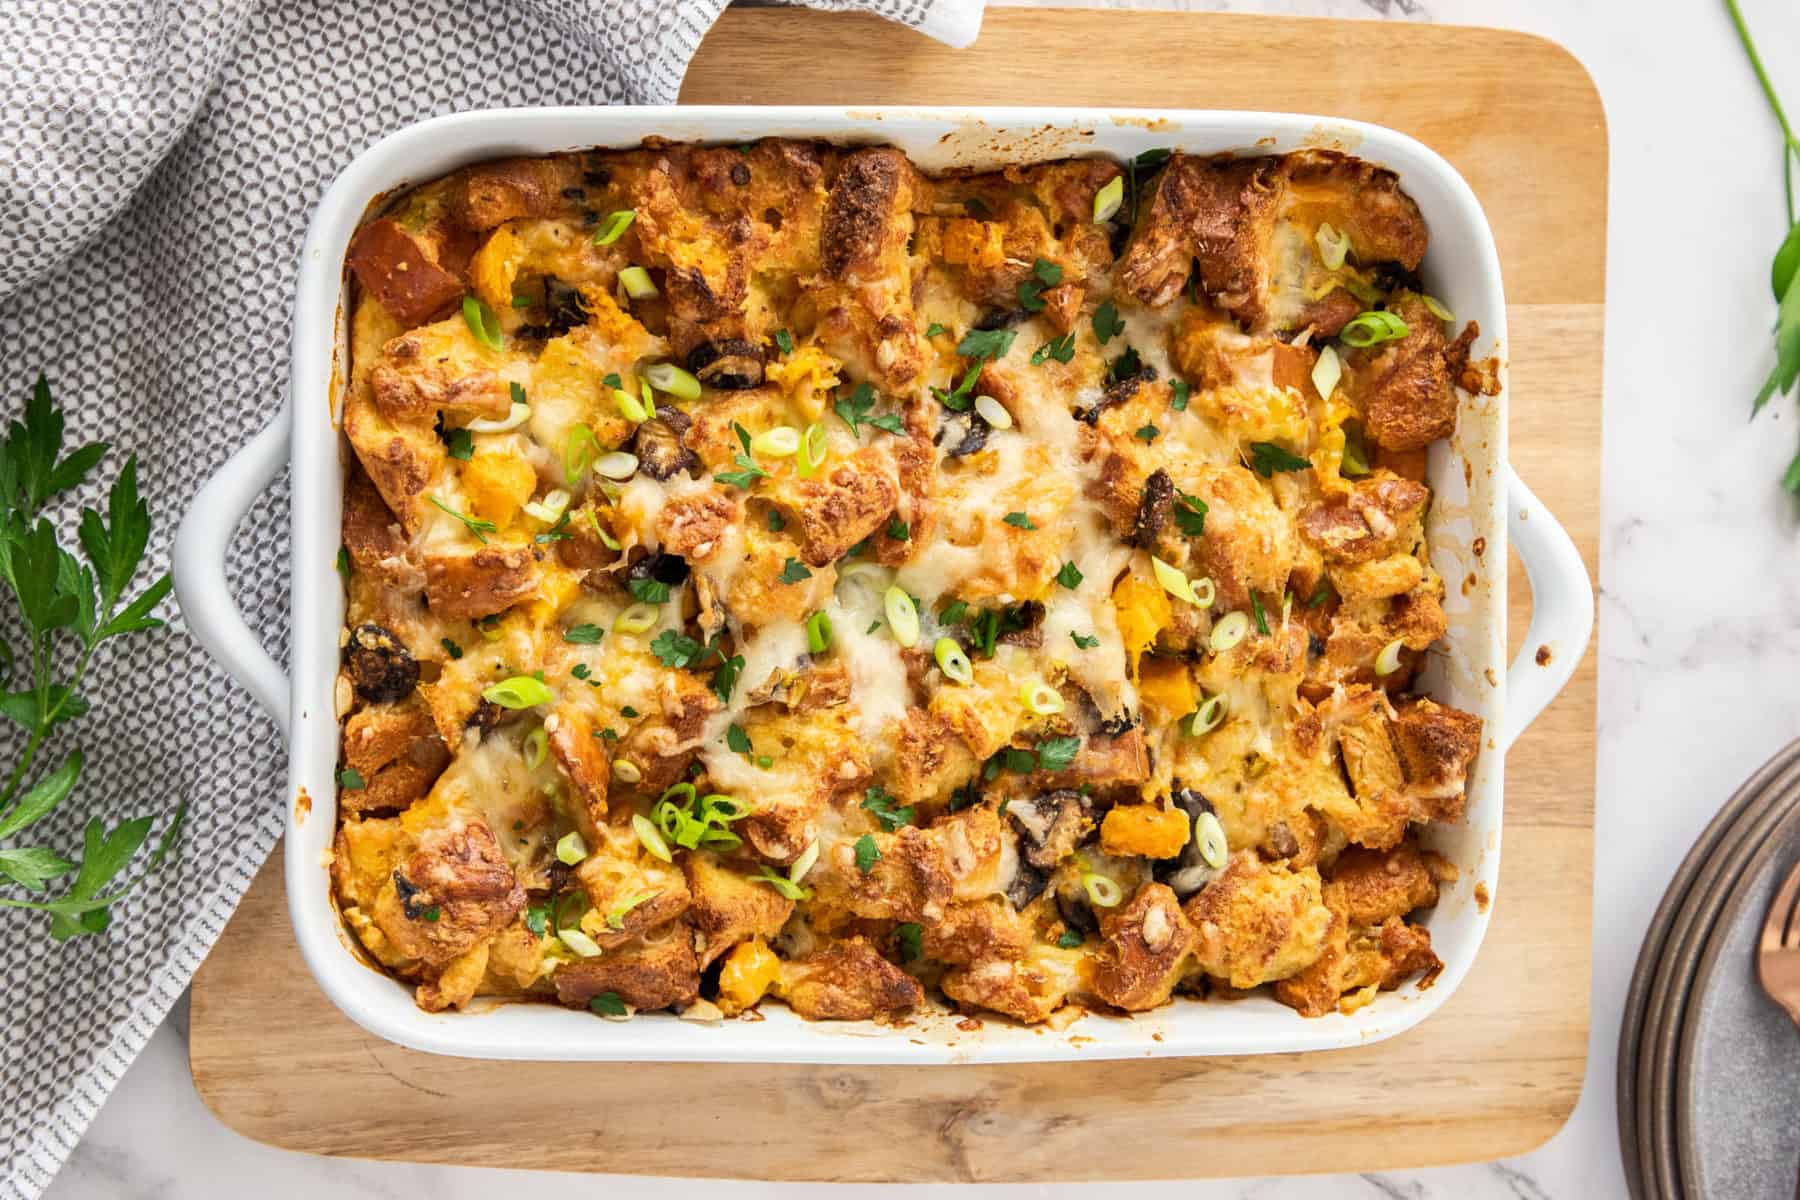 An overhead shot of a large dish of baked savory bread pudding